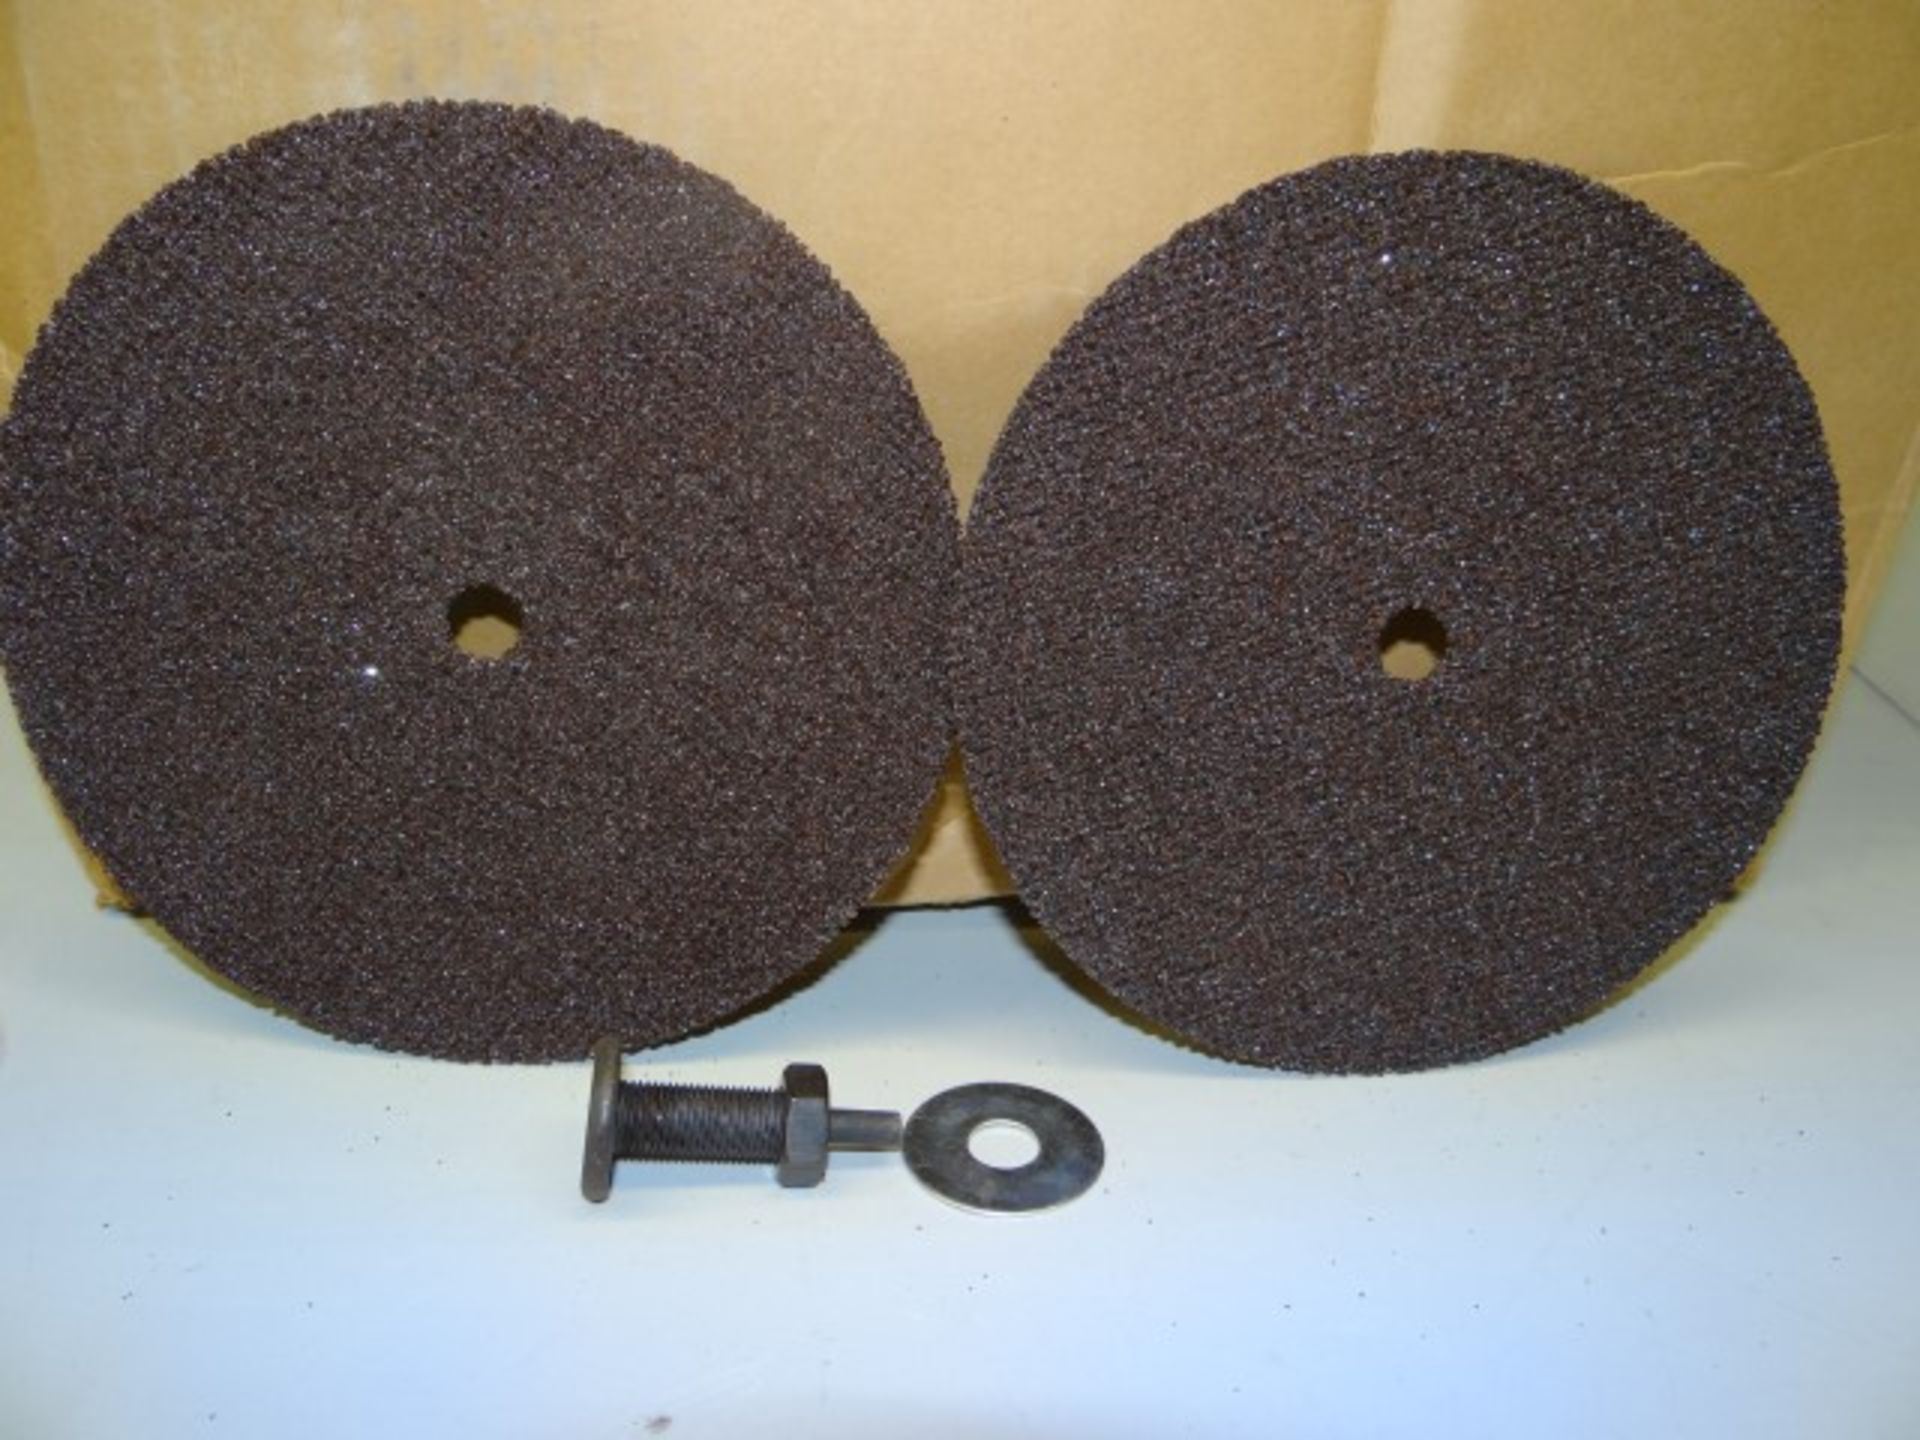 7" Aluminum Oxide Grinding and Cut Off Discs. 12 Blister Packs/Case with 2 Disks Per Pack with Arbor - Bild 3 aus 3